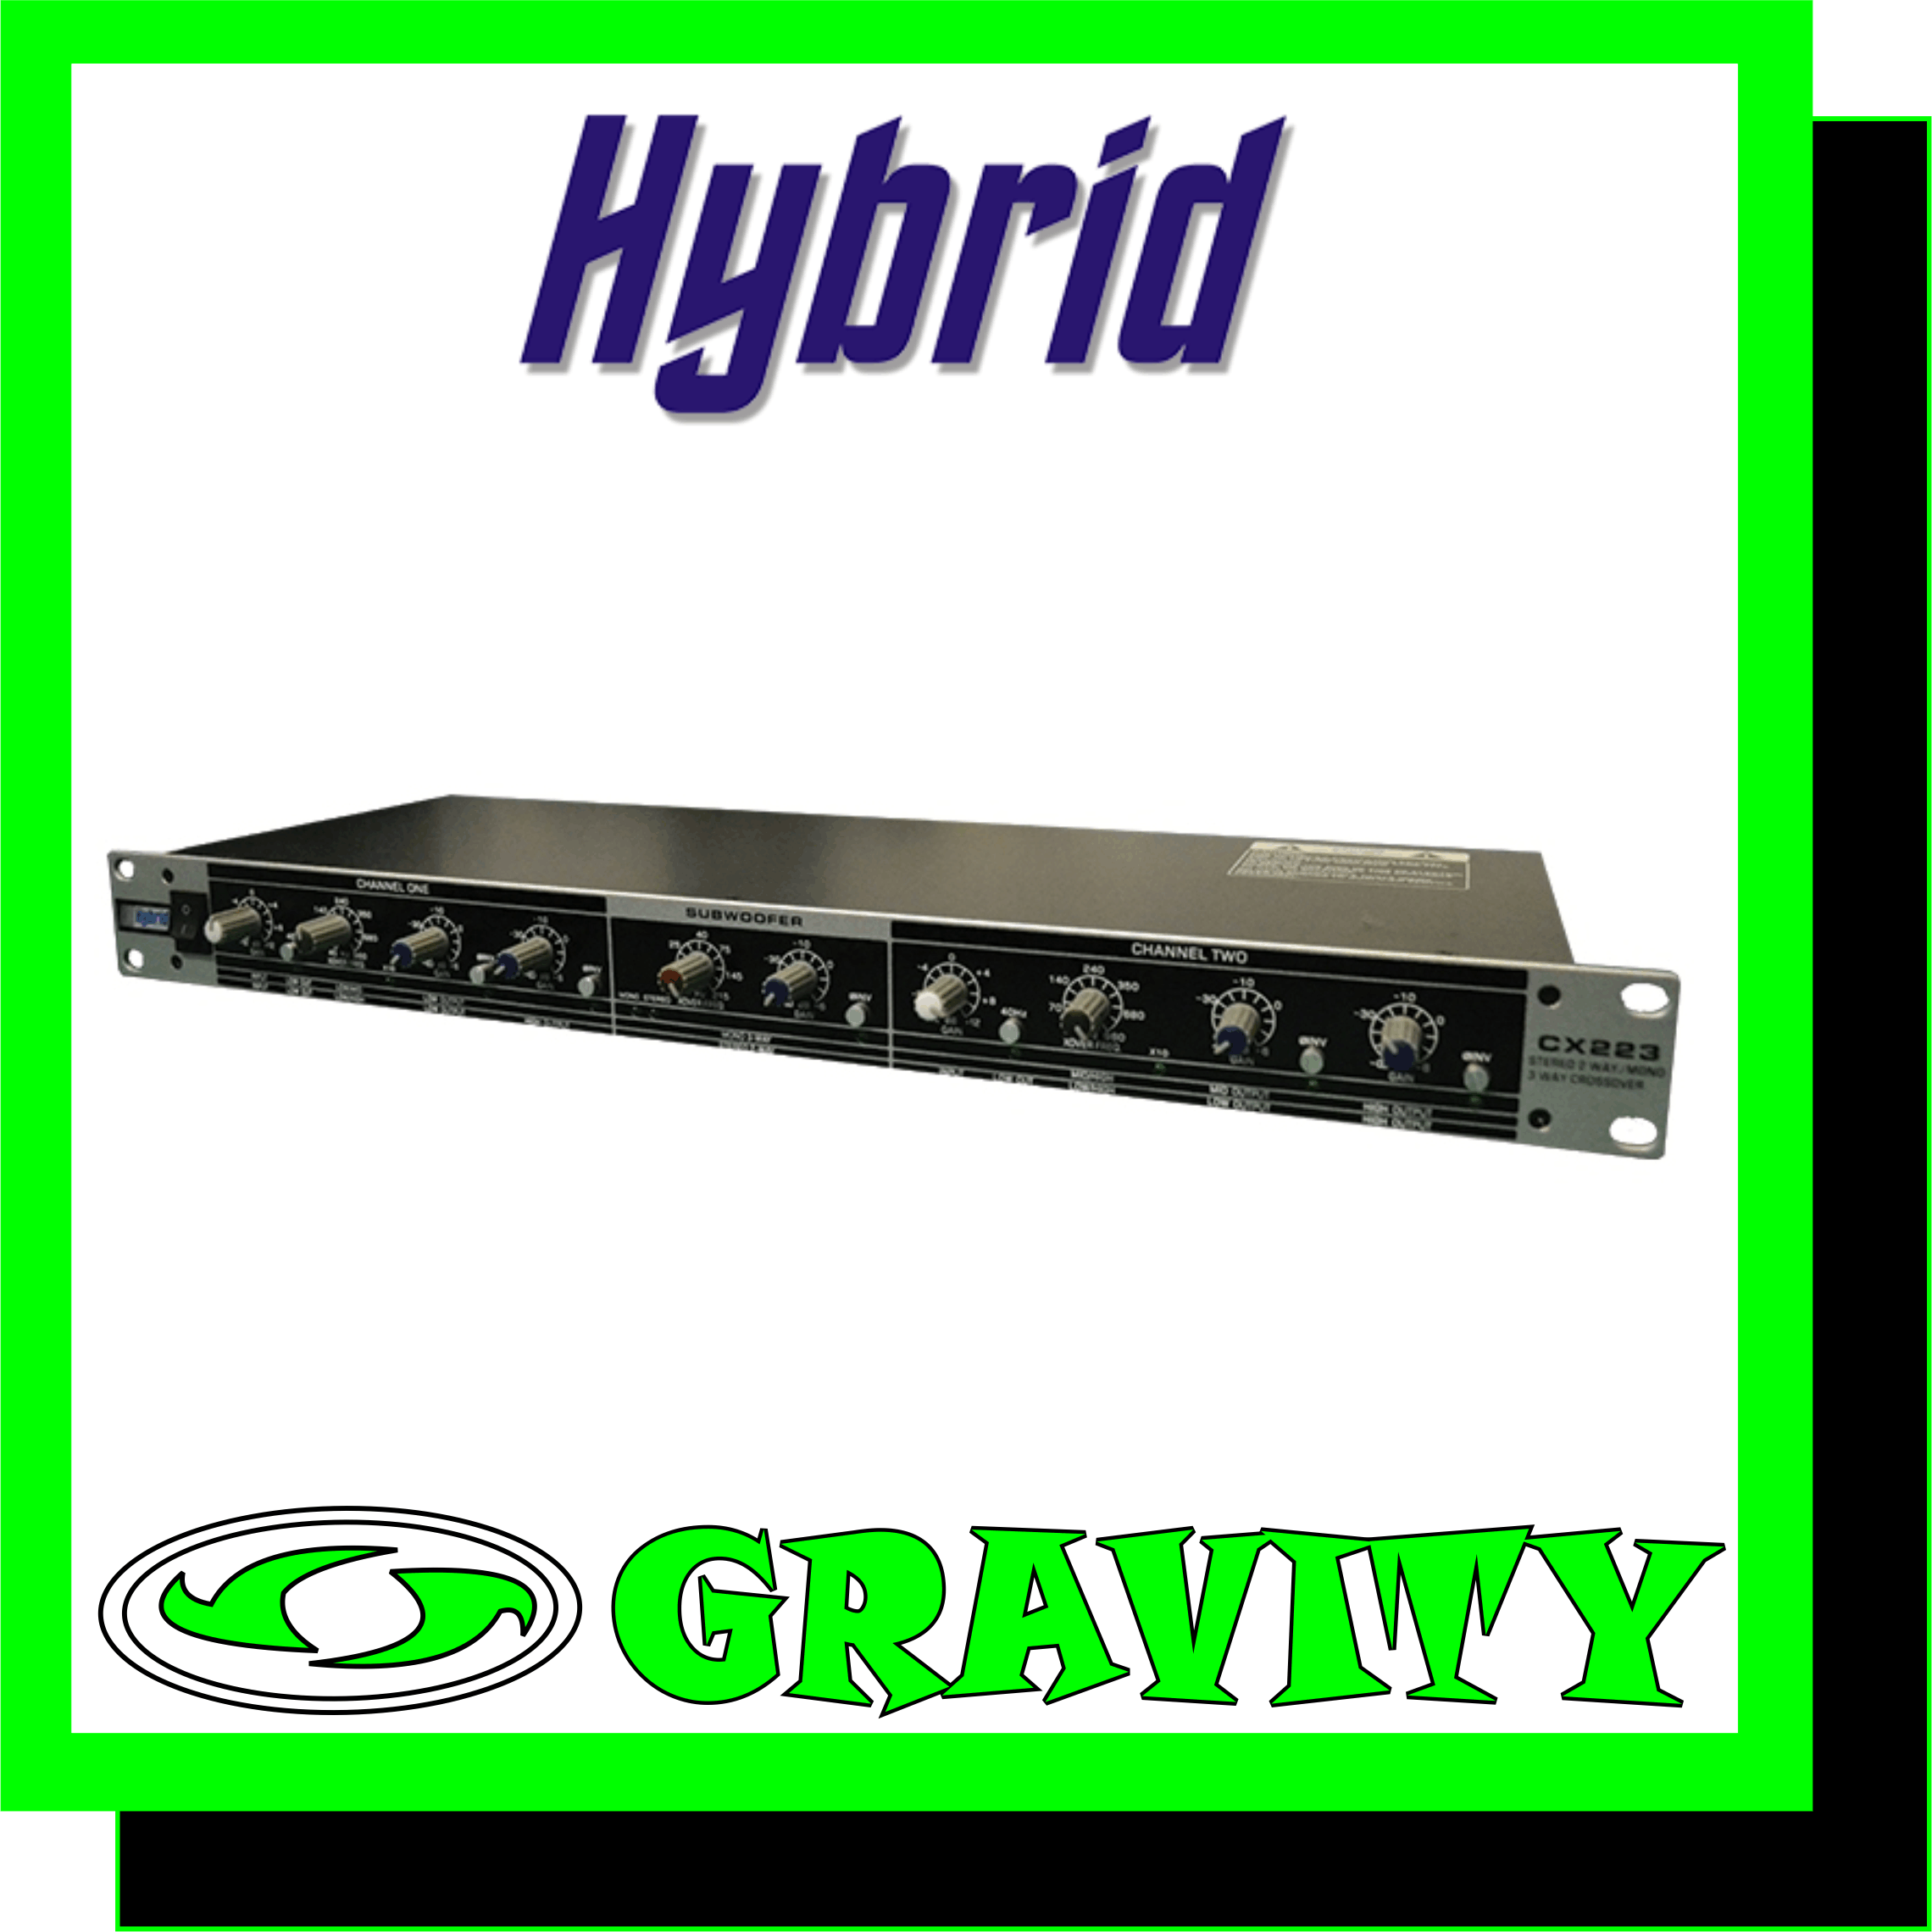 Hybrid CX223 2-Way Stereo 3-Way Mono Active Crossover  -2-Way Stereo / 3-Way Mono, Active Crossover -Seperate sub outputs -24dB / Octave Linkwitz-Riley filters -Indivudual output level controls, for all bands -Individual phase reverse switches -Servo Bal XLR connectors for inputs and outputs